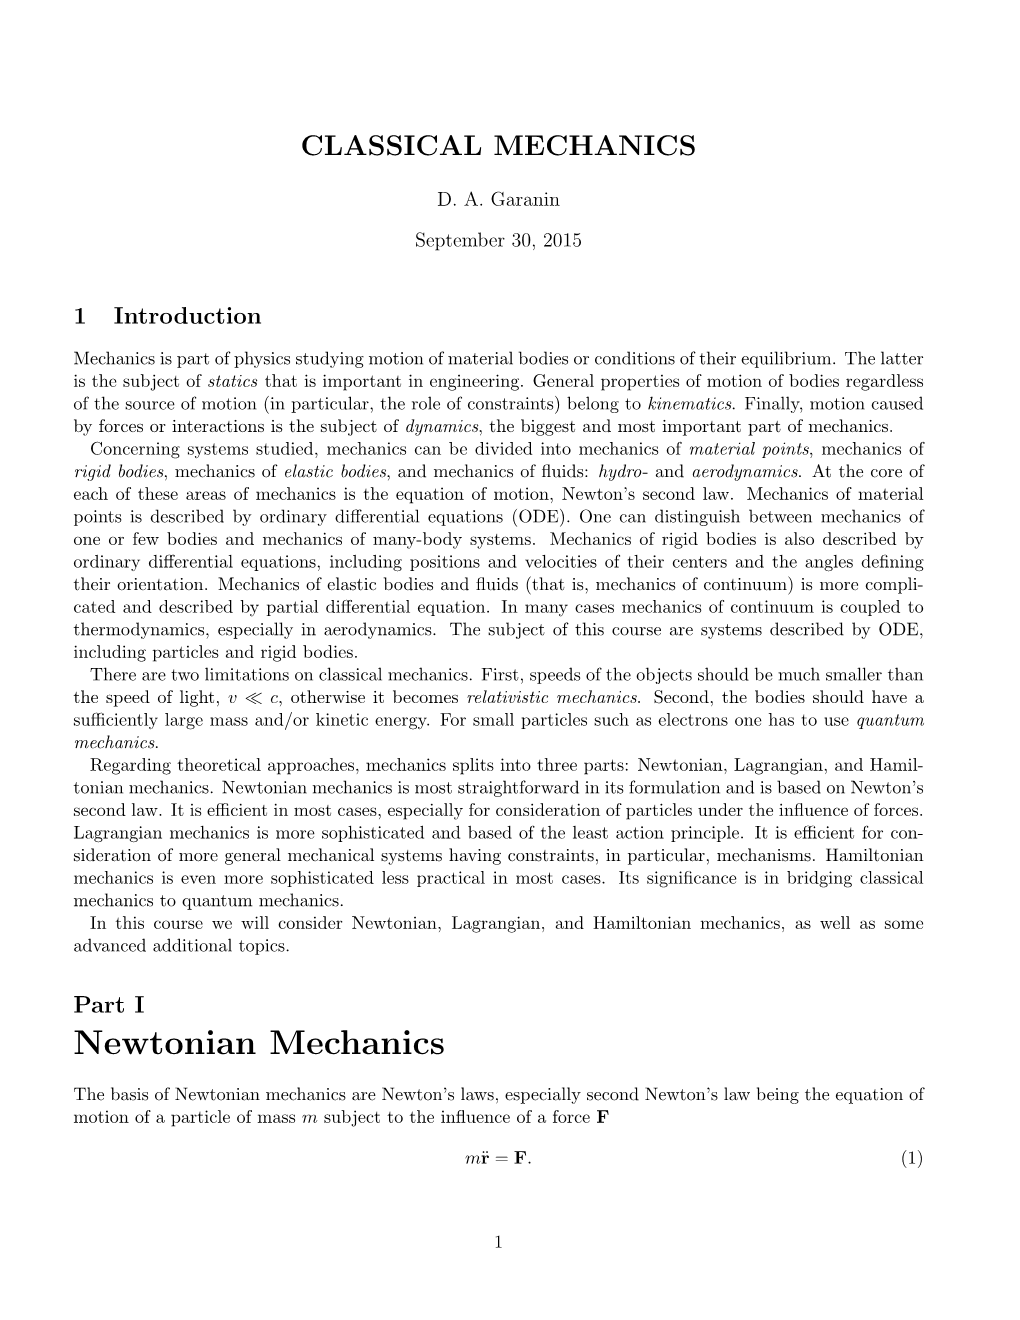 Newtonian Mechanics Is Most Straightforward in Its Formulation and Is Based on Newton’S Second Law